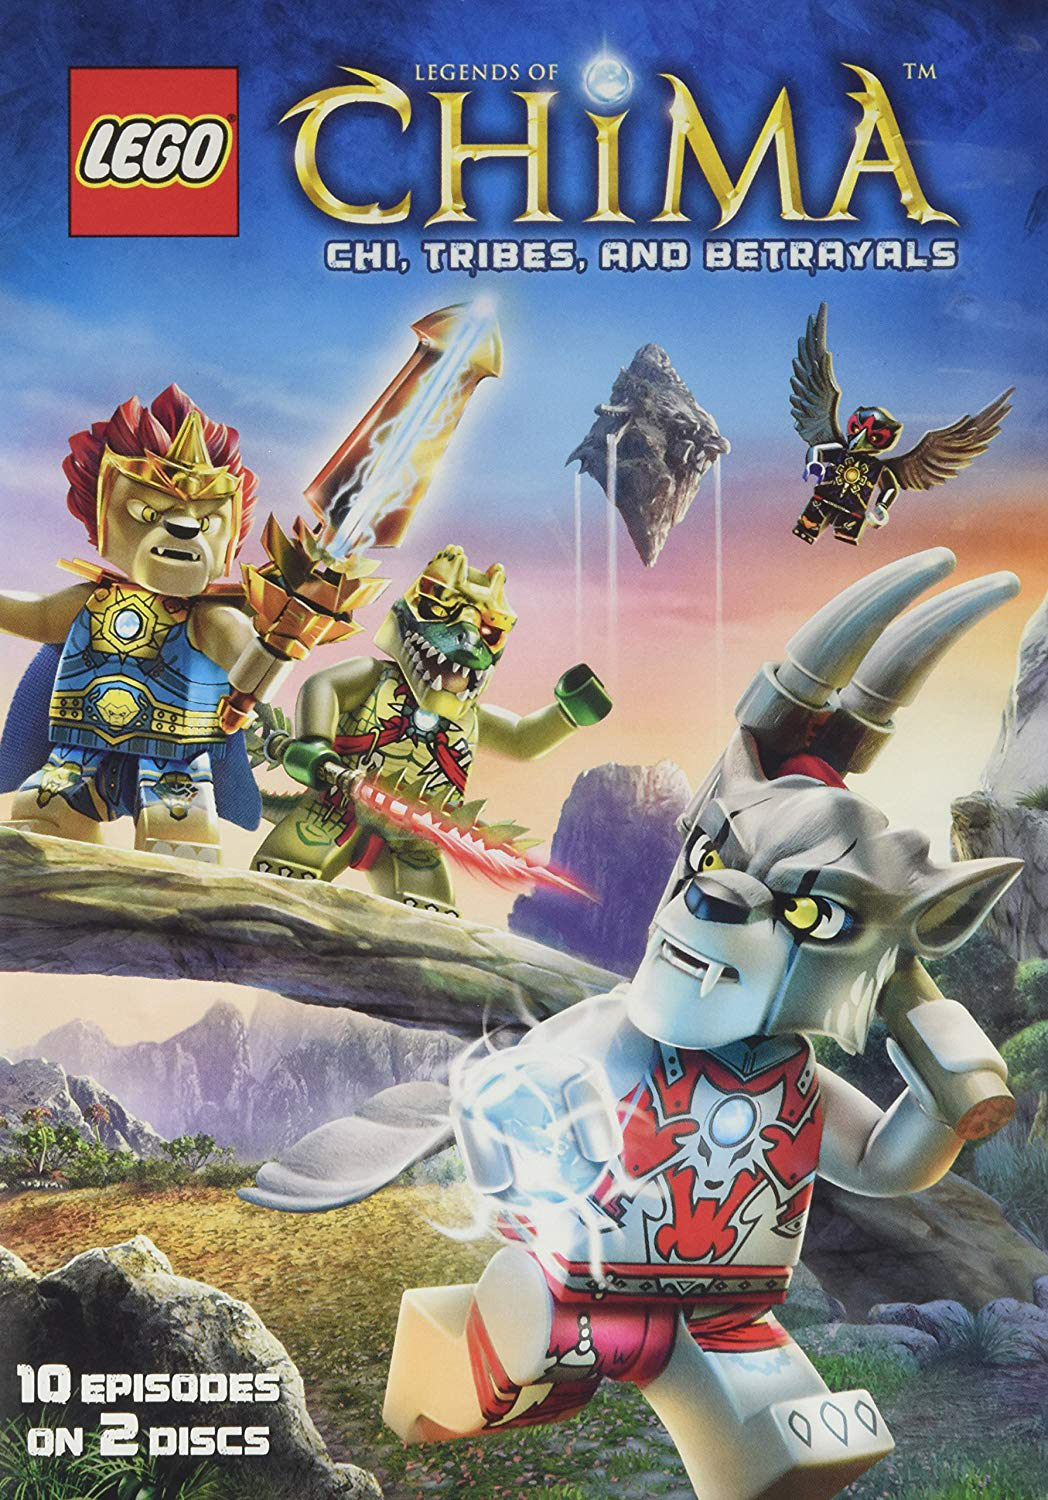 LEGO: Legends of Chima Season One, Part Two [2 Discs] Buy